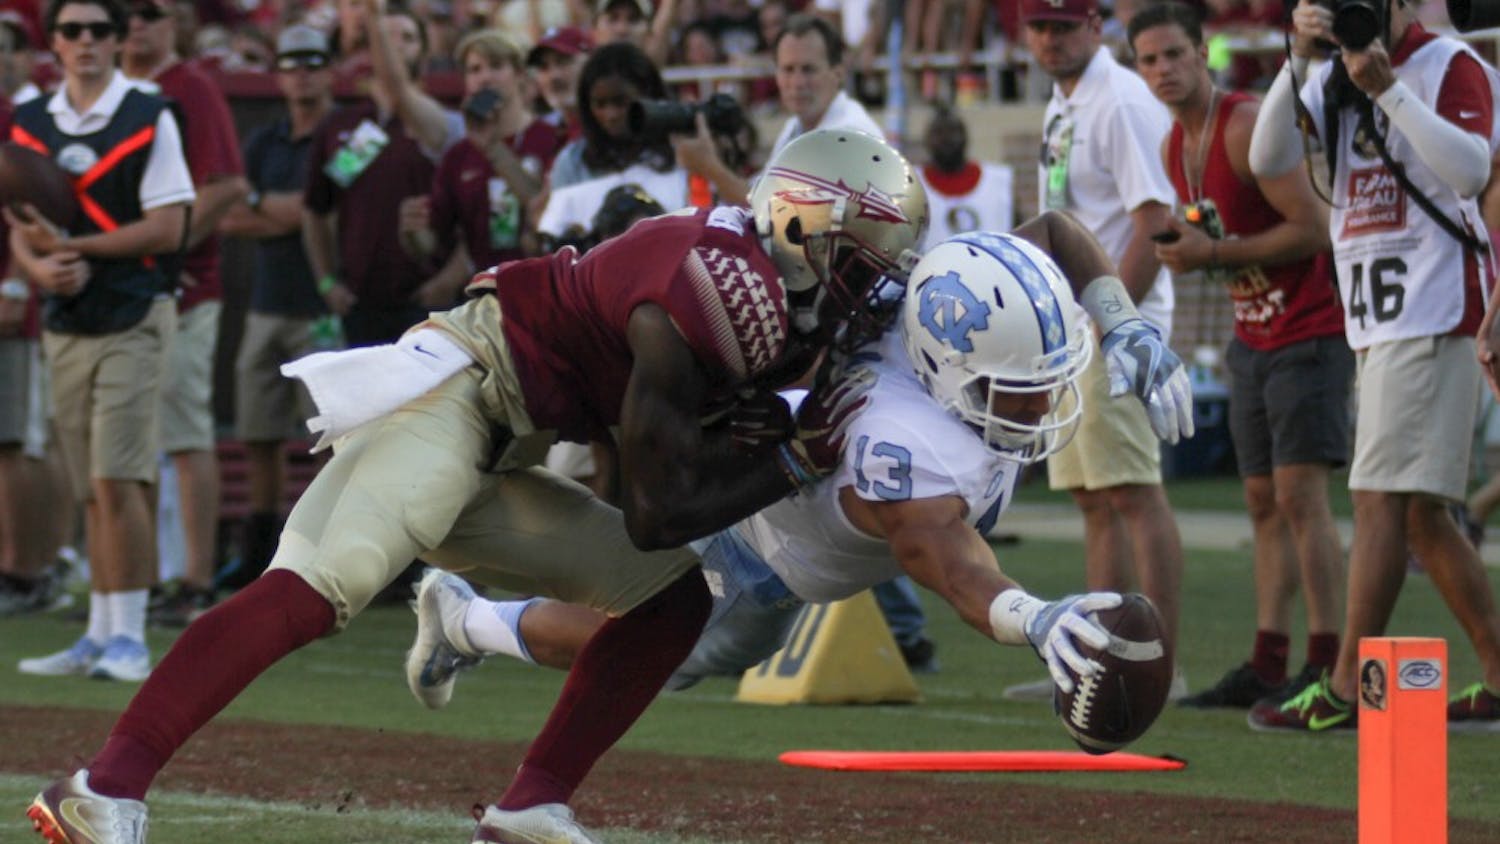 Mack Hollins (13) makes a diving play while being defended by an FSU player to score a touchdown.